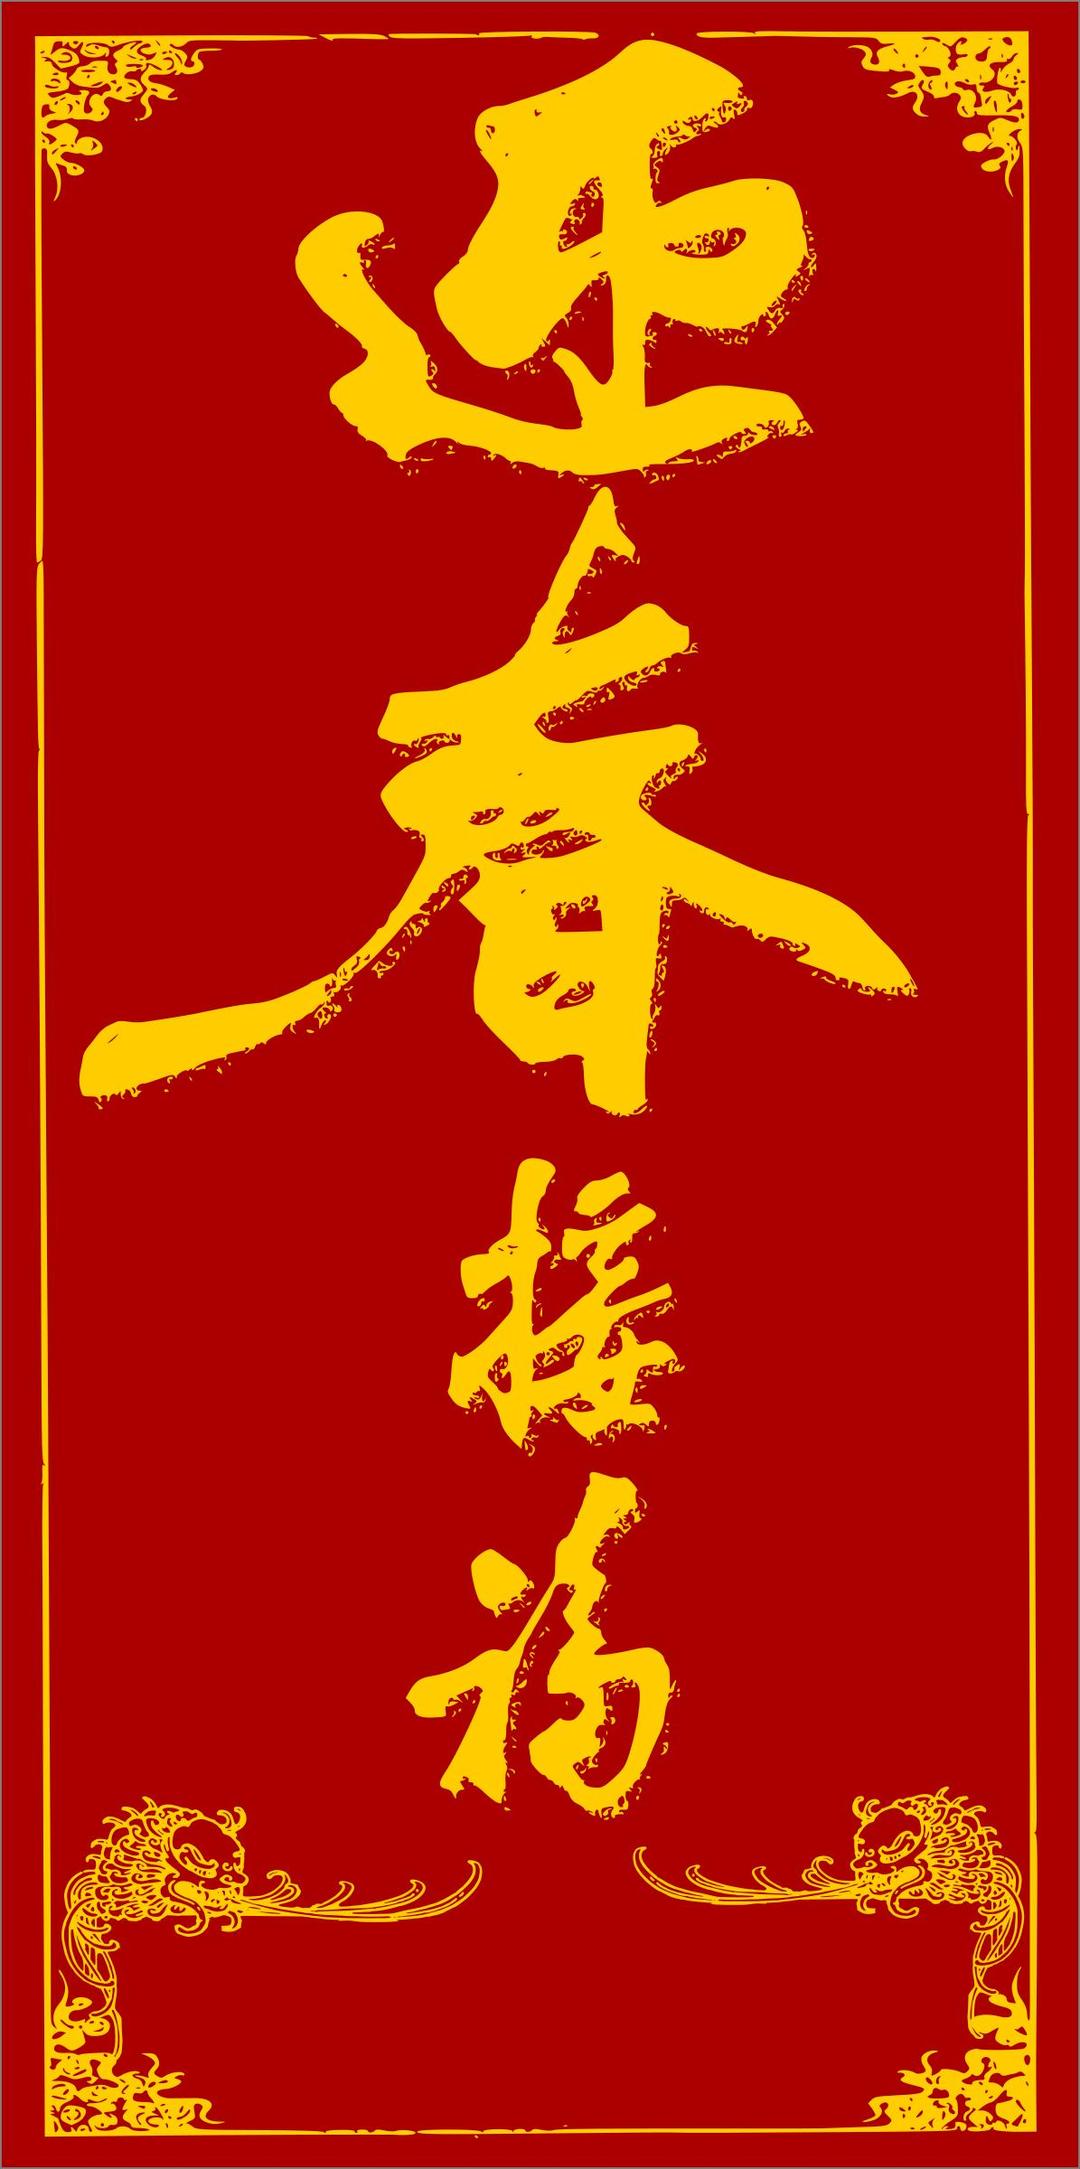 Chinesse New Year Red Envelope png transparent